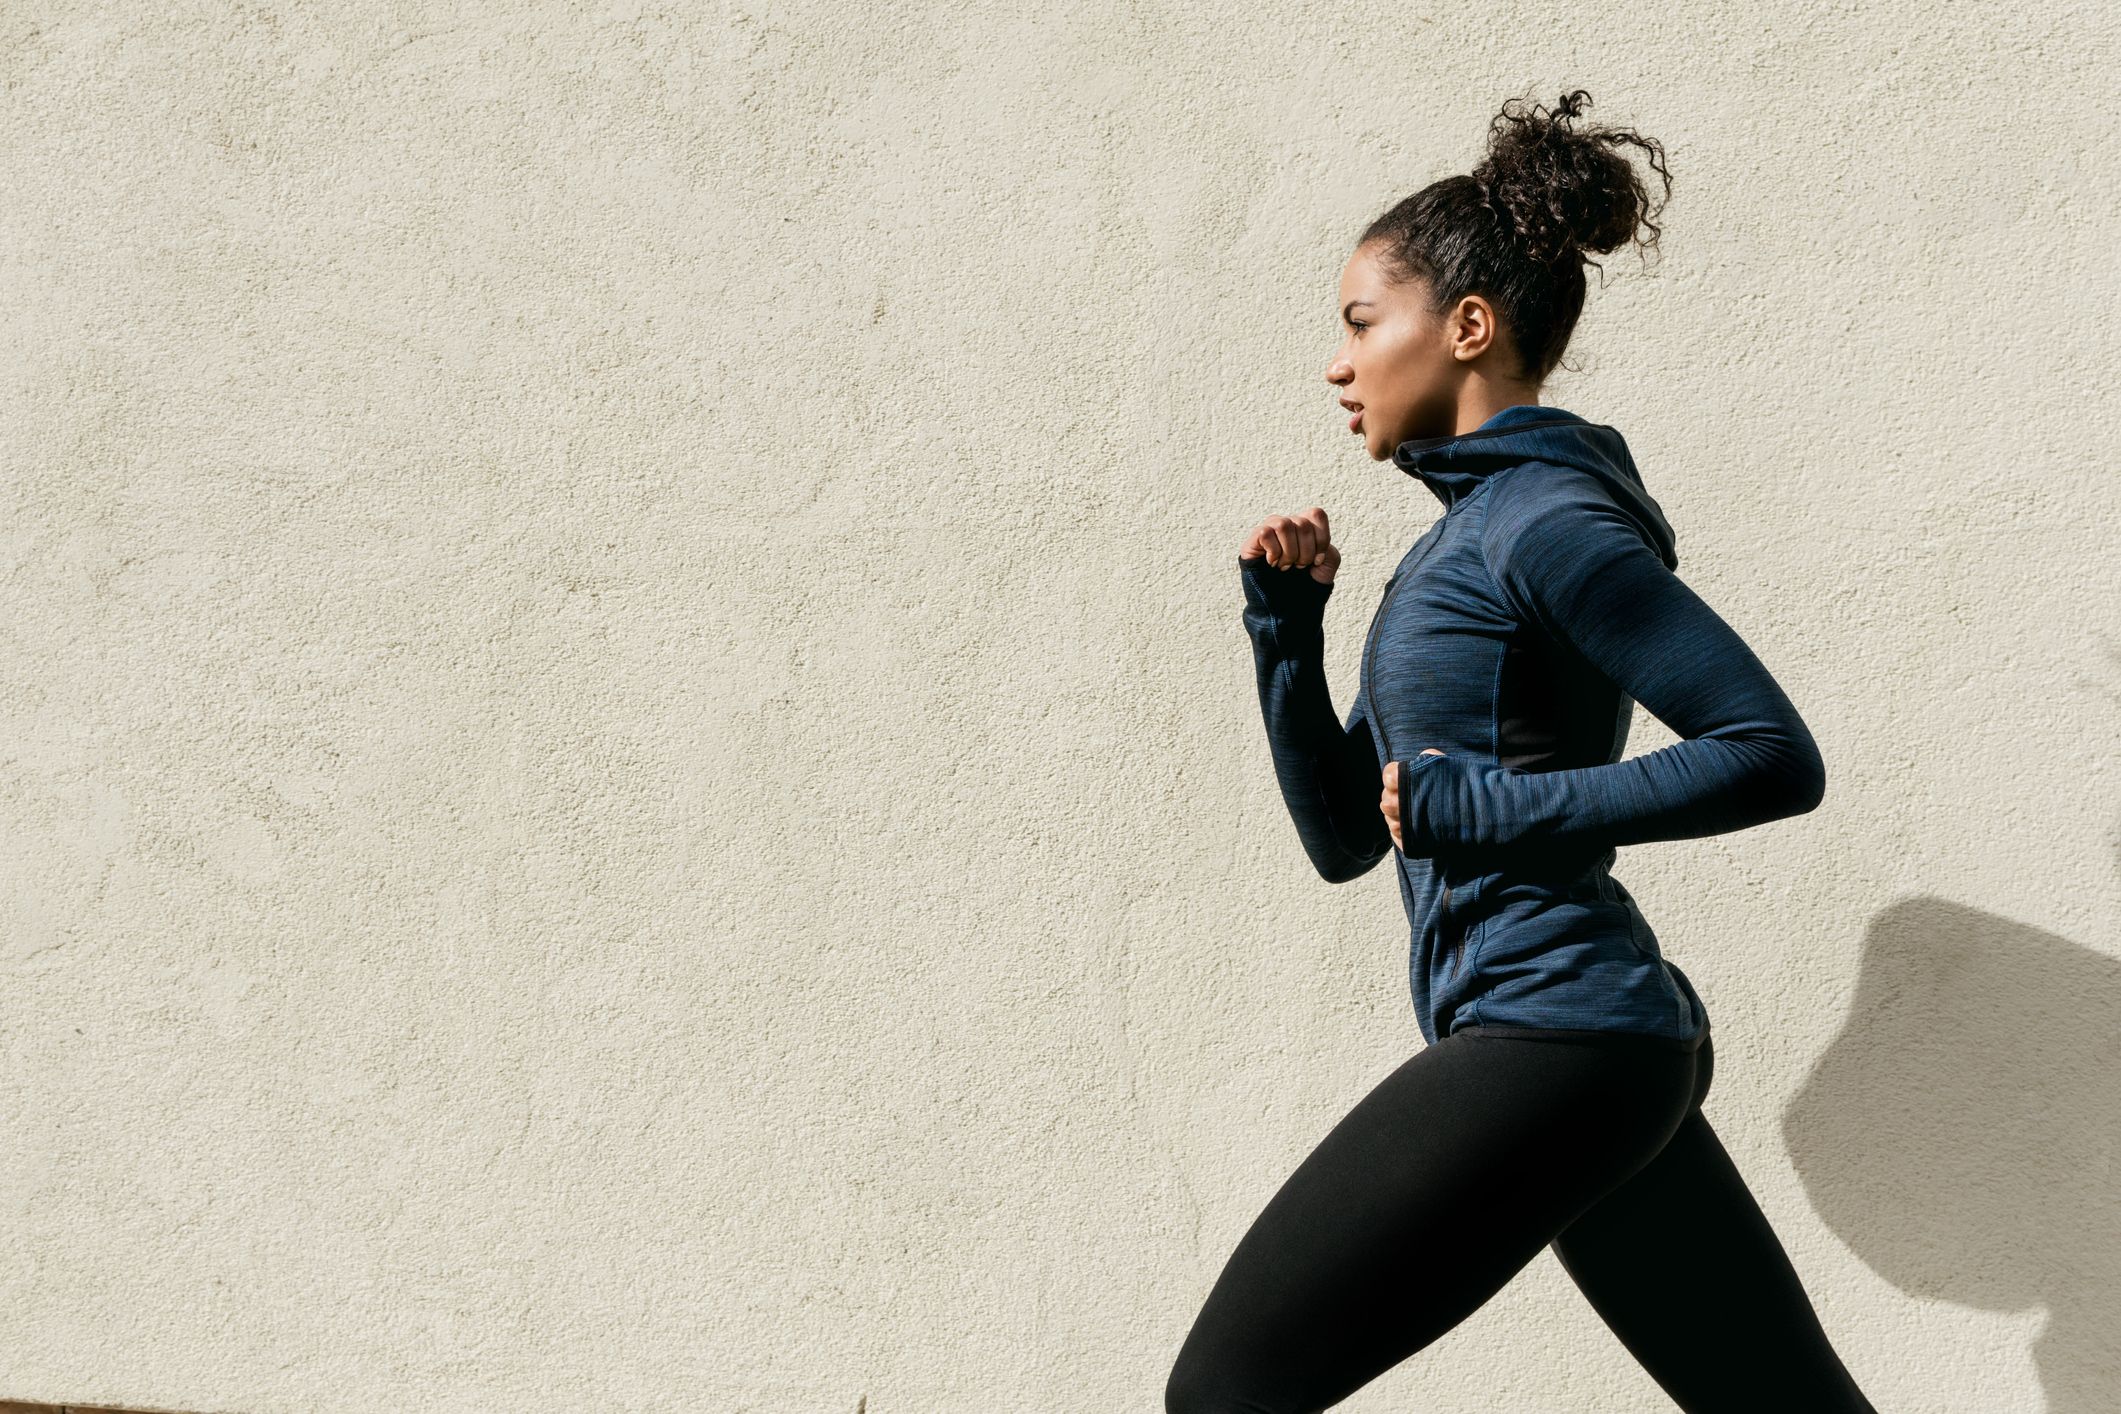 Myths About the Female Running Body - How to Deal With Running